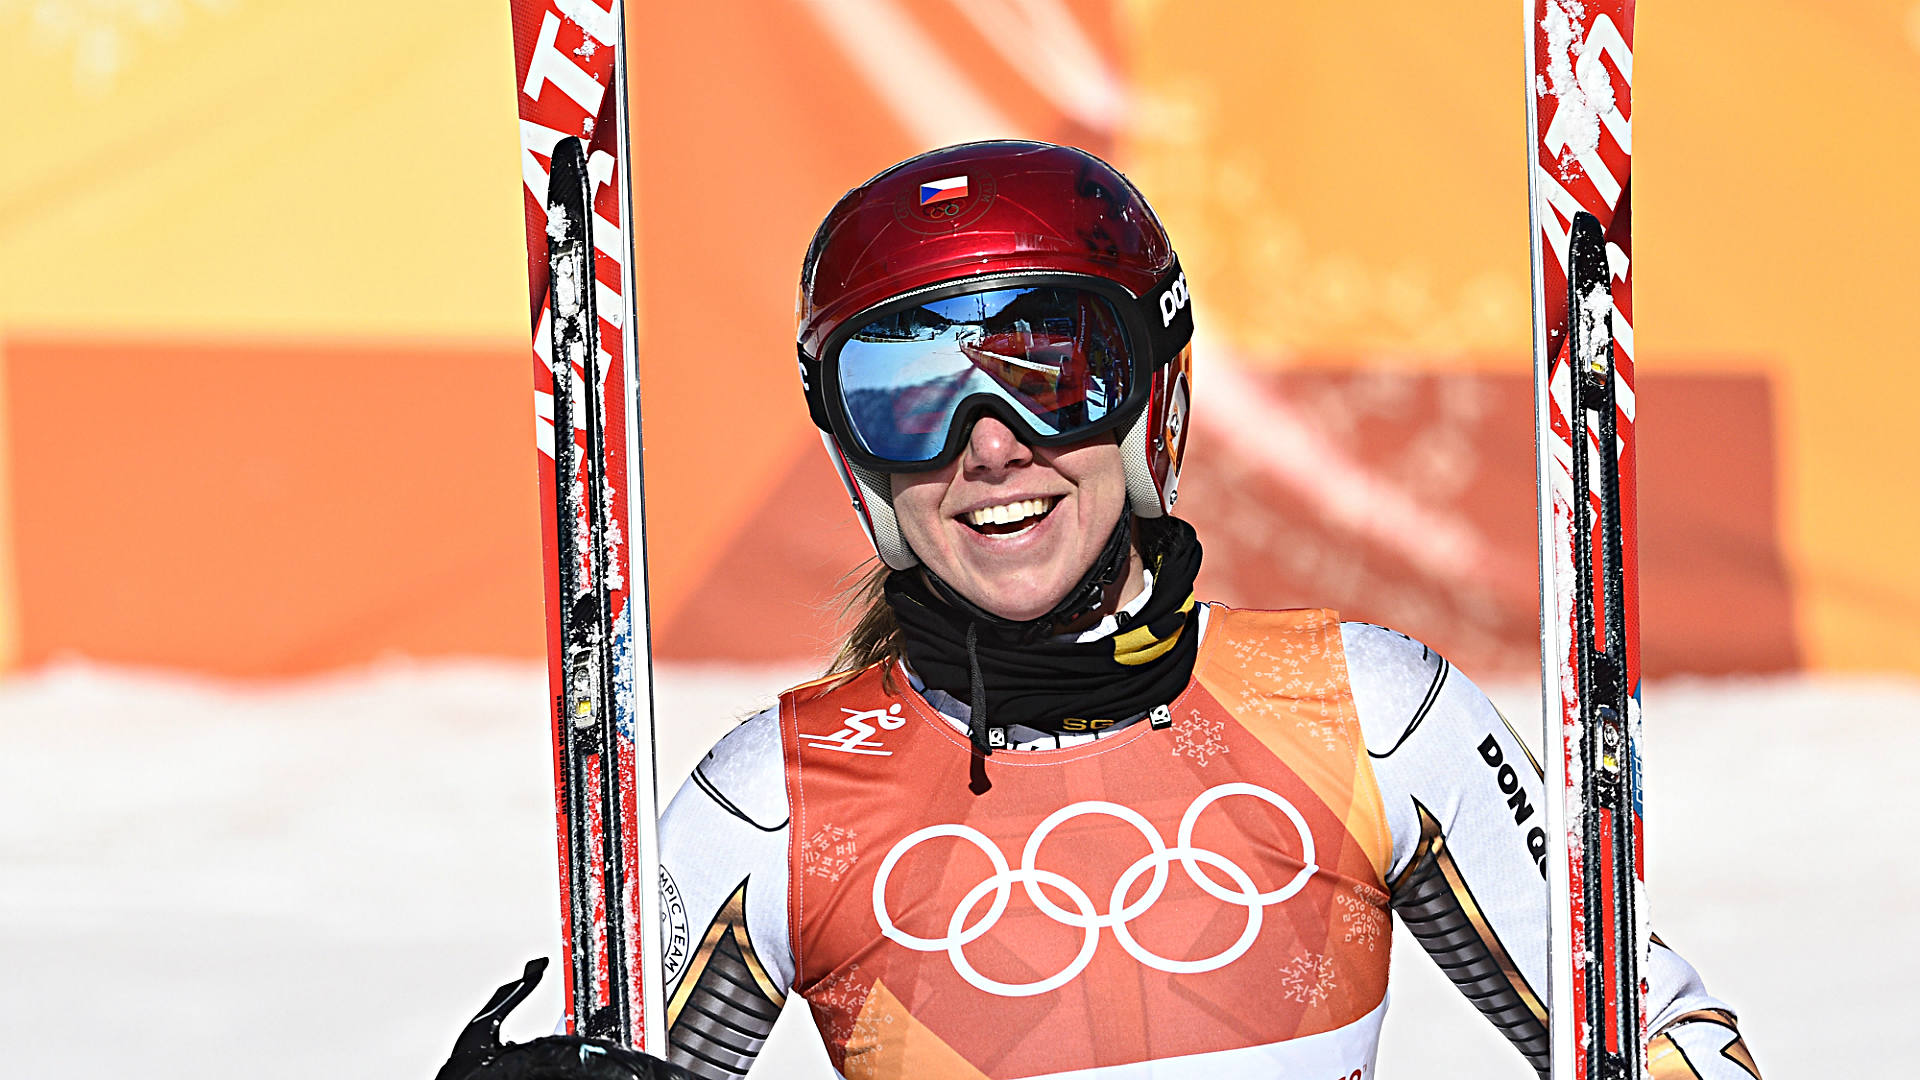 Czech Snowboarder Ester Ledecka Uses Secondhand Skis To Win Gold